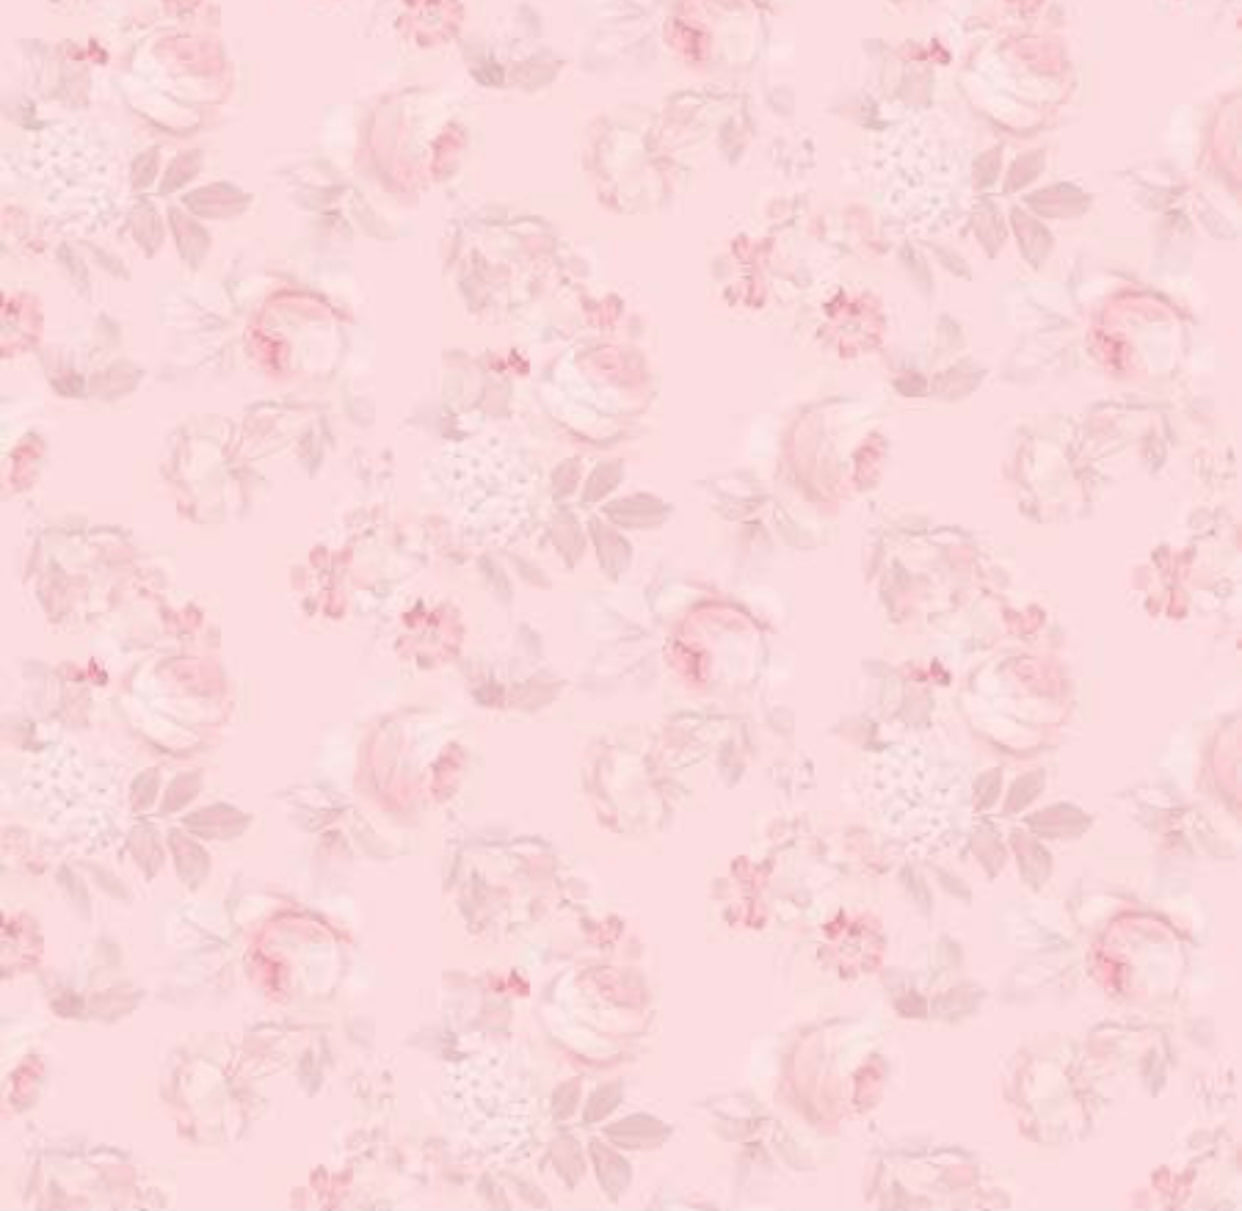 Rose & Violet`s Garden fabric. Faded Roses in Blush